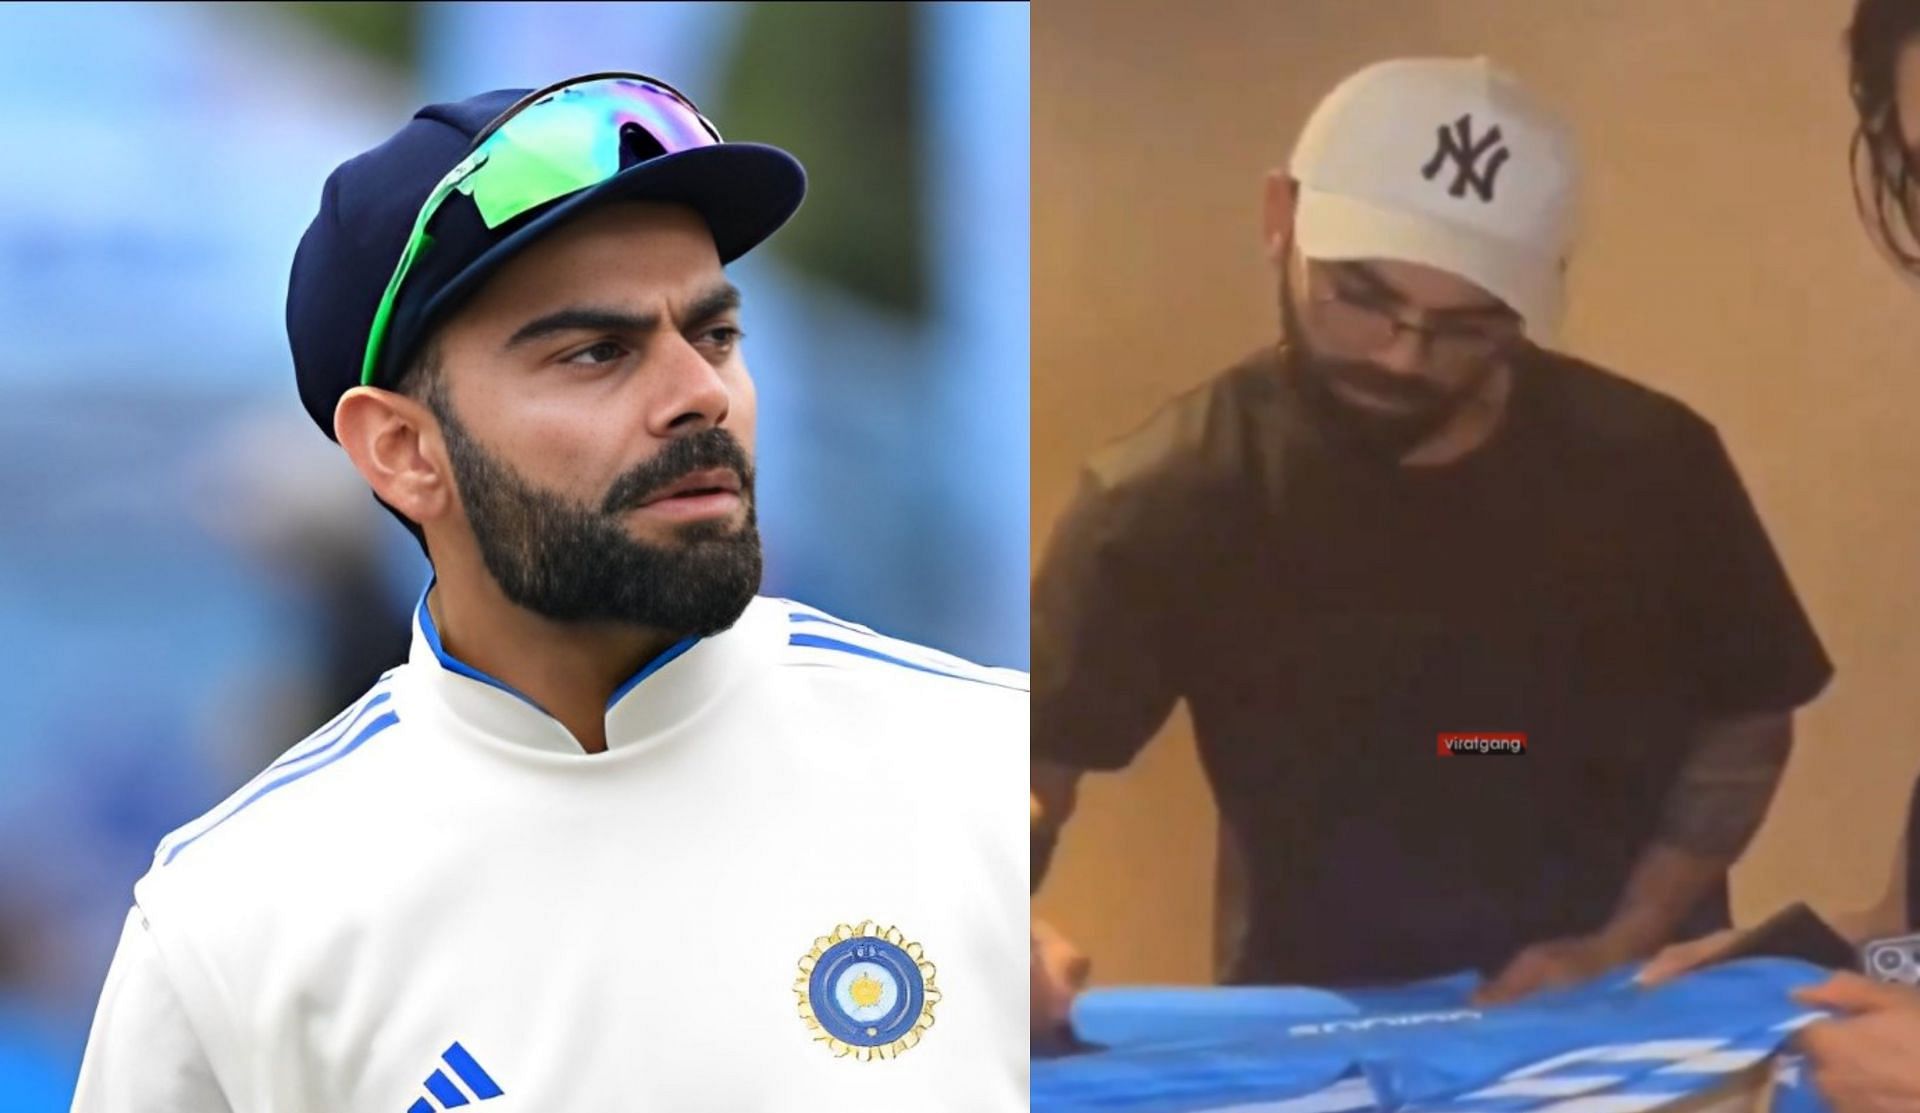 [Watch] Virat Kohli gives autograph on Indian jersey to a fan in South Africa